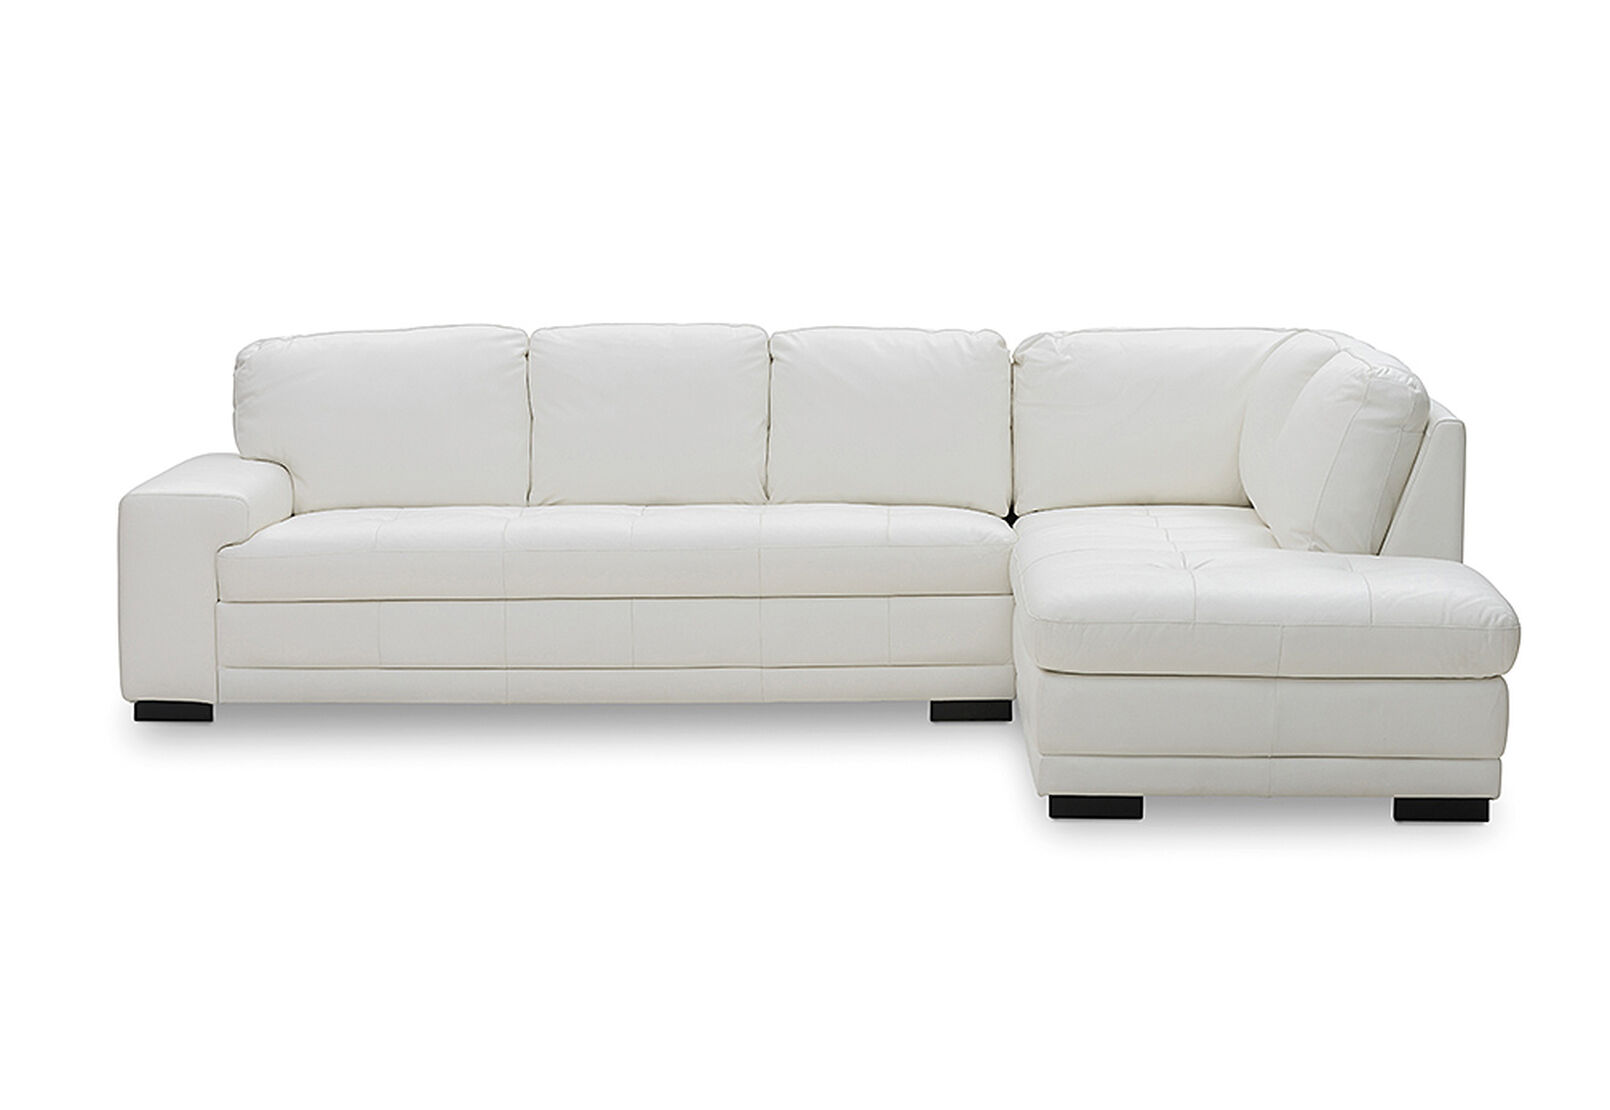 3 Seater Corner Chaise Amart Furniture, White Leather Chaise